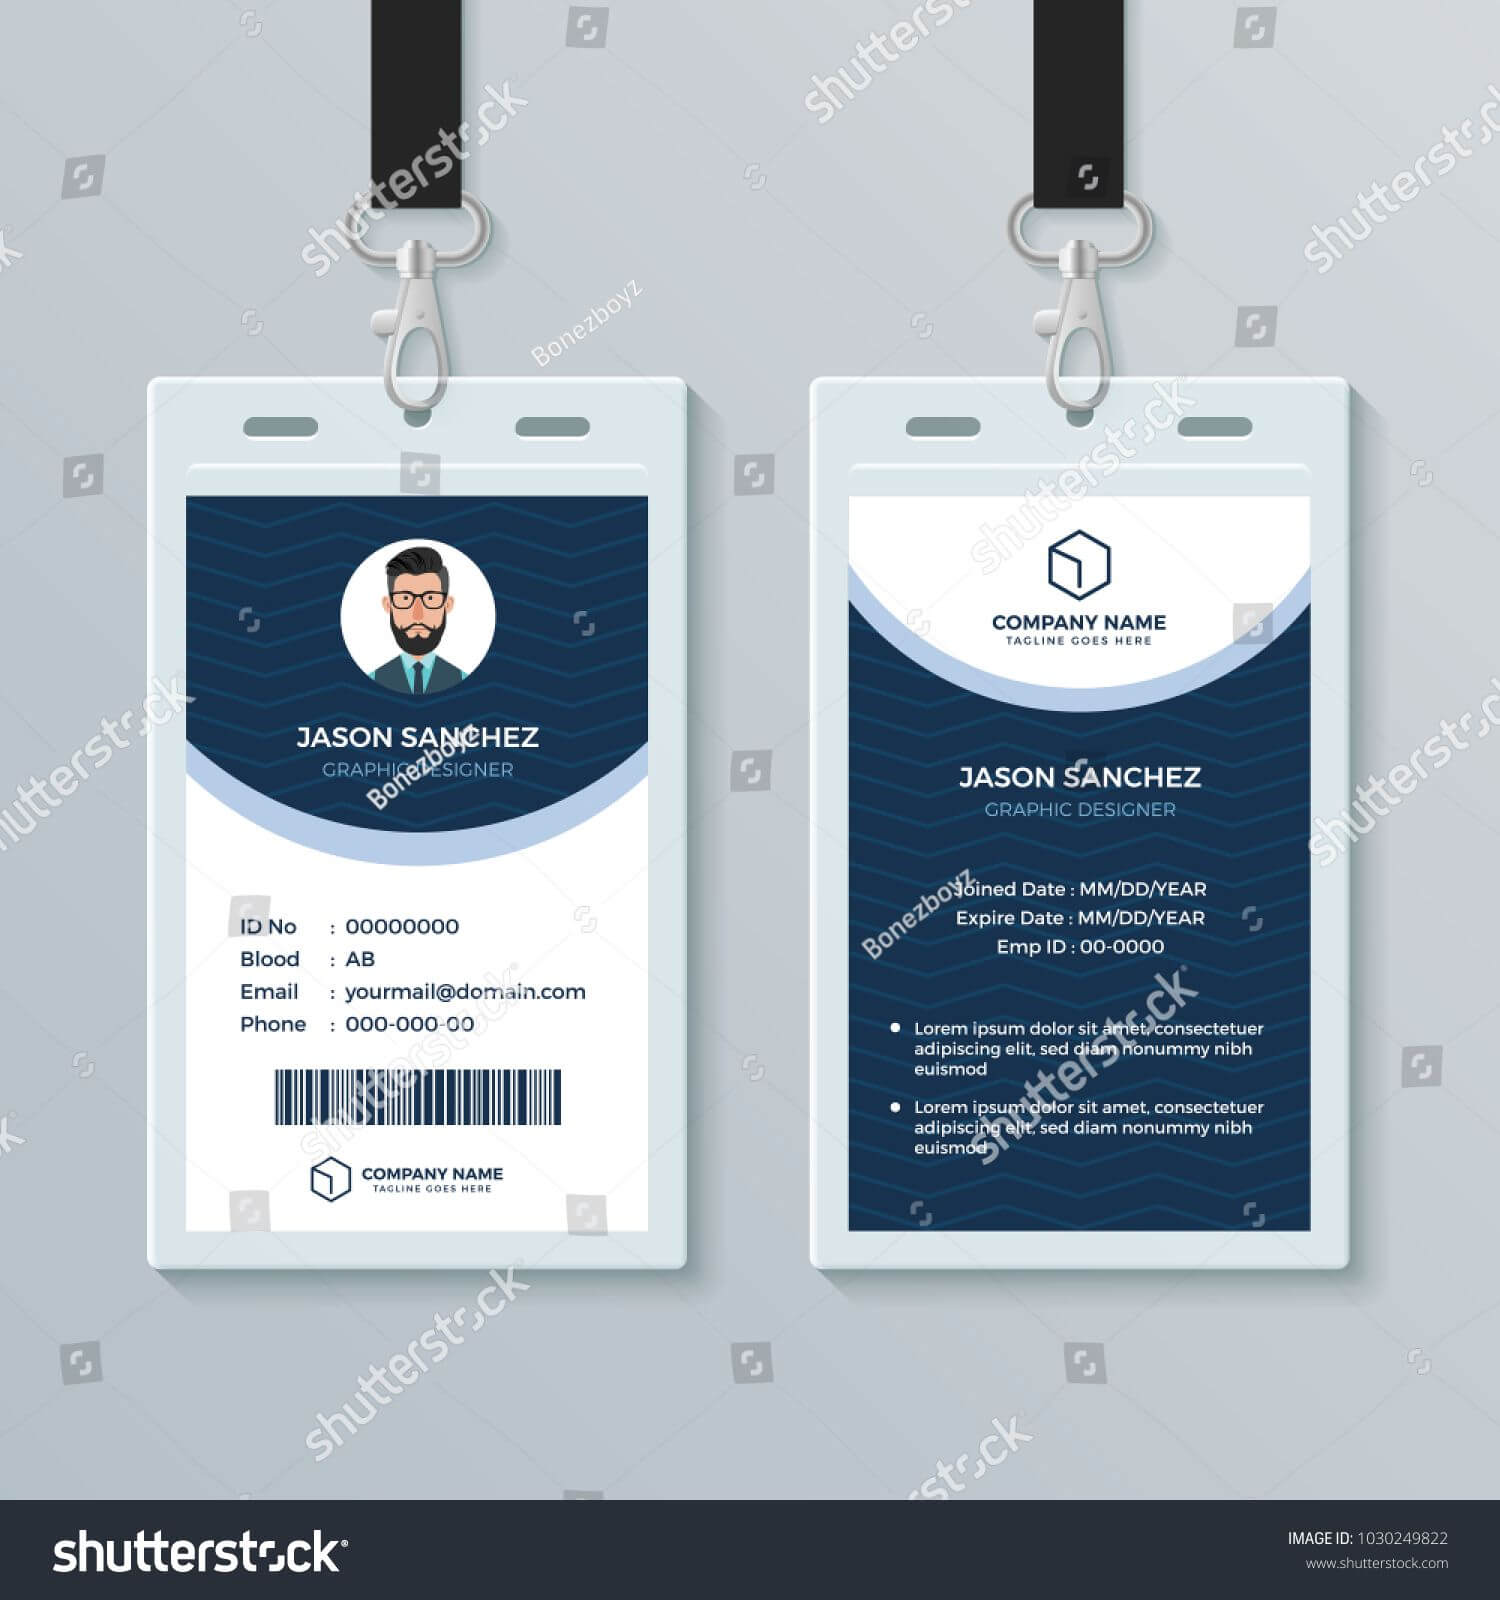 003 Free Id Card Template Fascinating Ideas Design Online Within Free Id Card Template Word